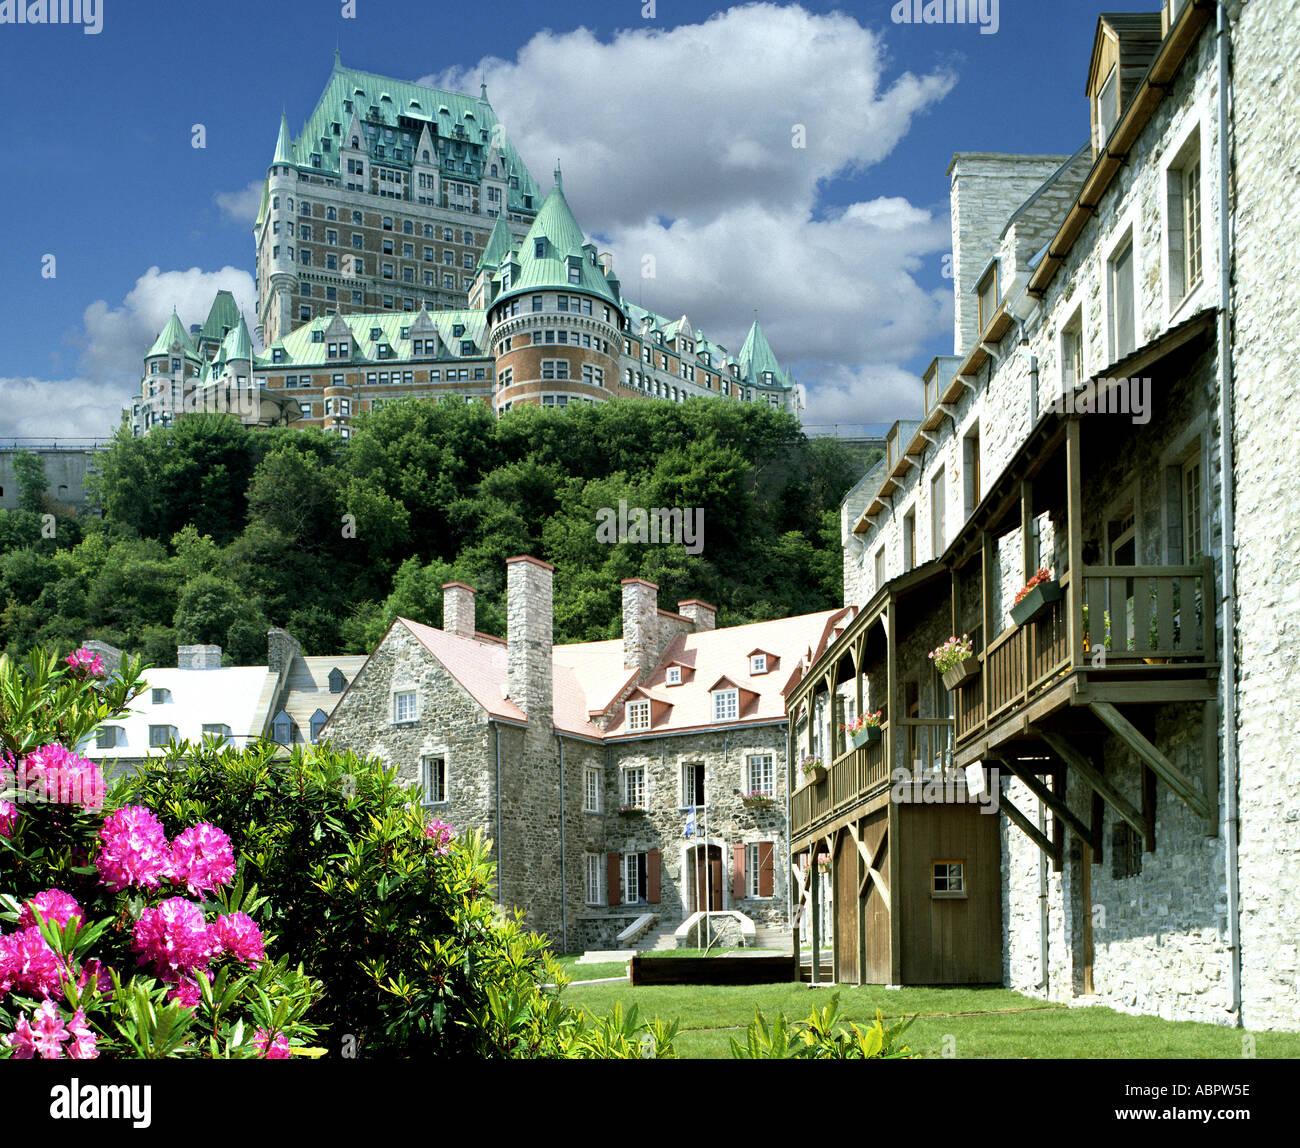 CA - QUEBEC: Quebec Old Town and Chateau Frontenac Stock Photo